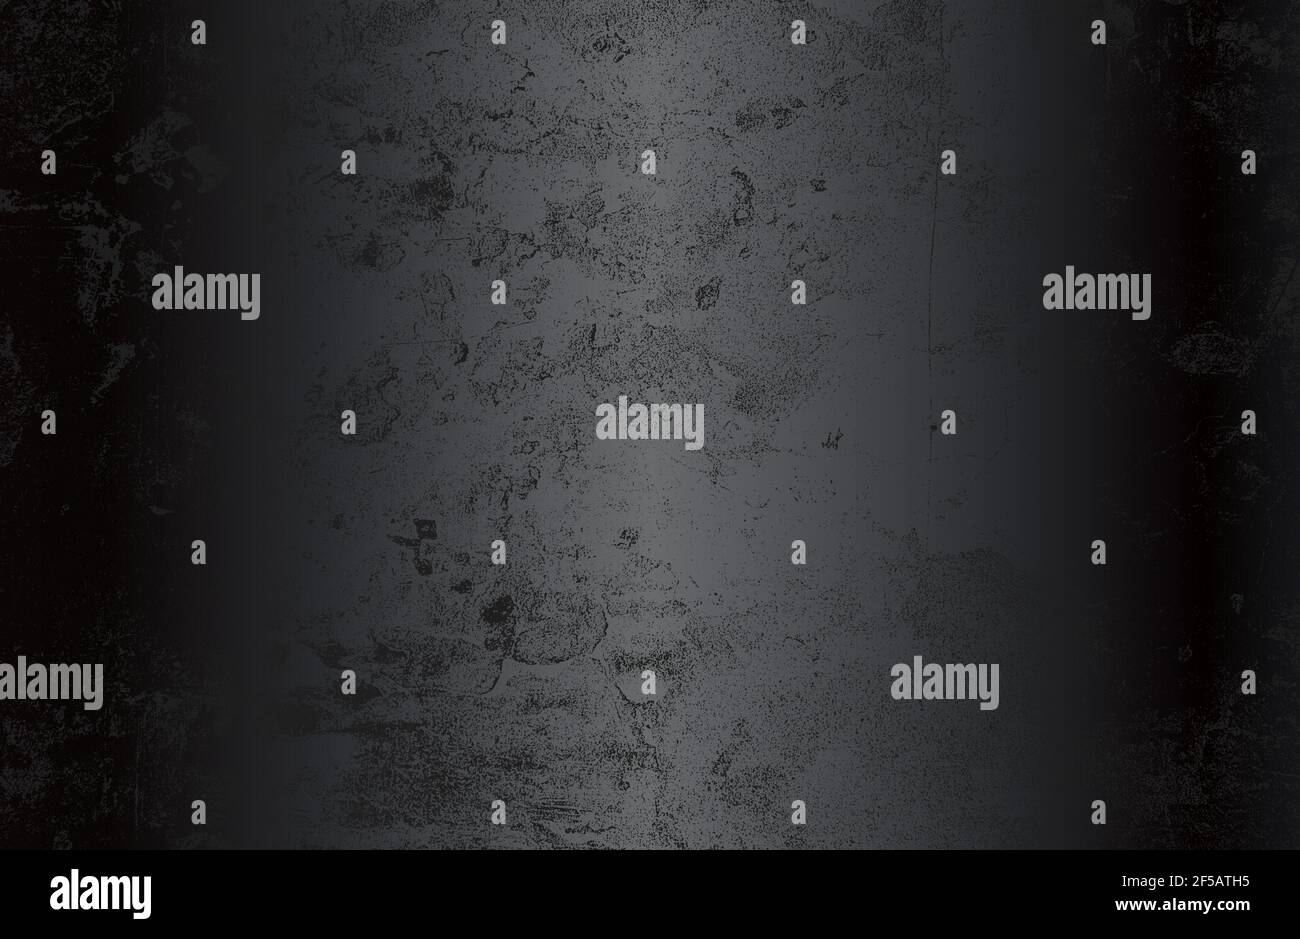 Luxury black metal gradient background with distressed cracked concrete texture. Vector illustration Stock Vector